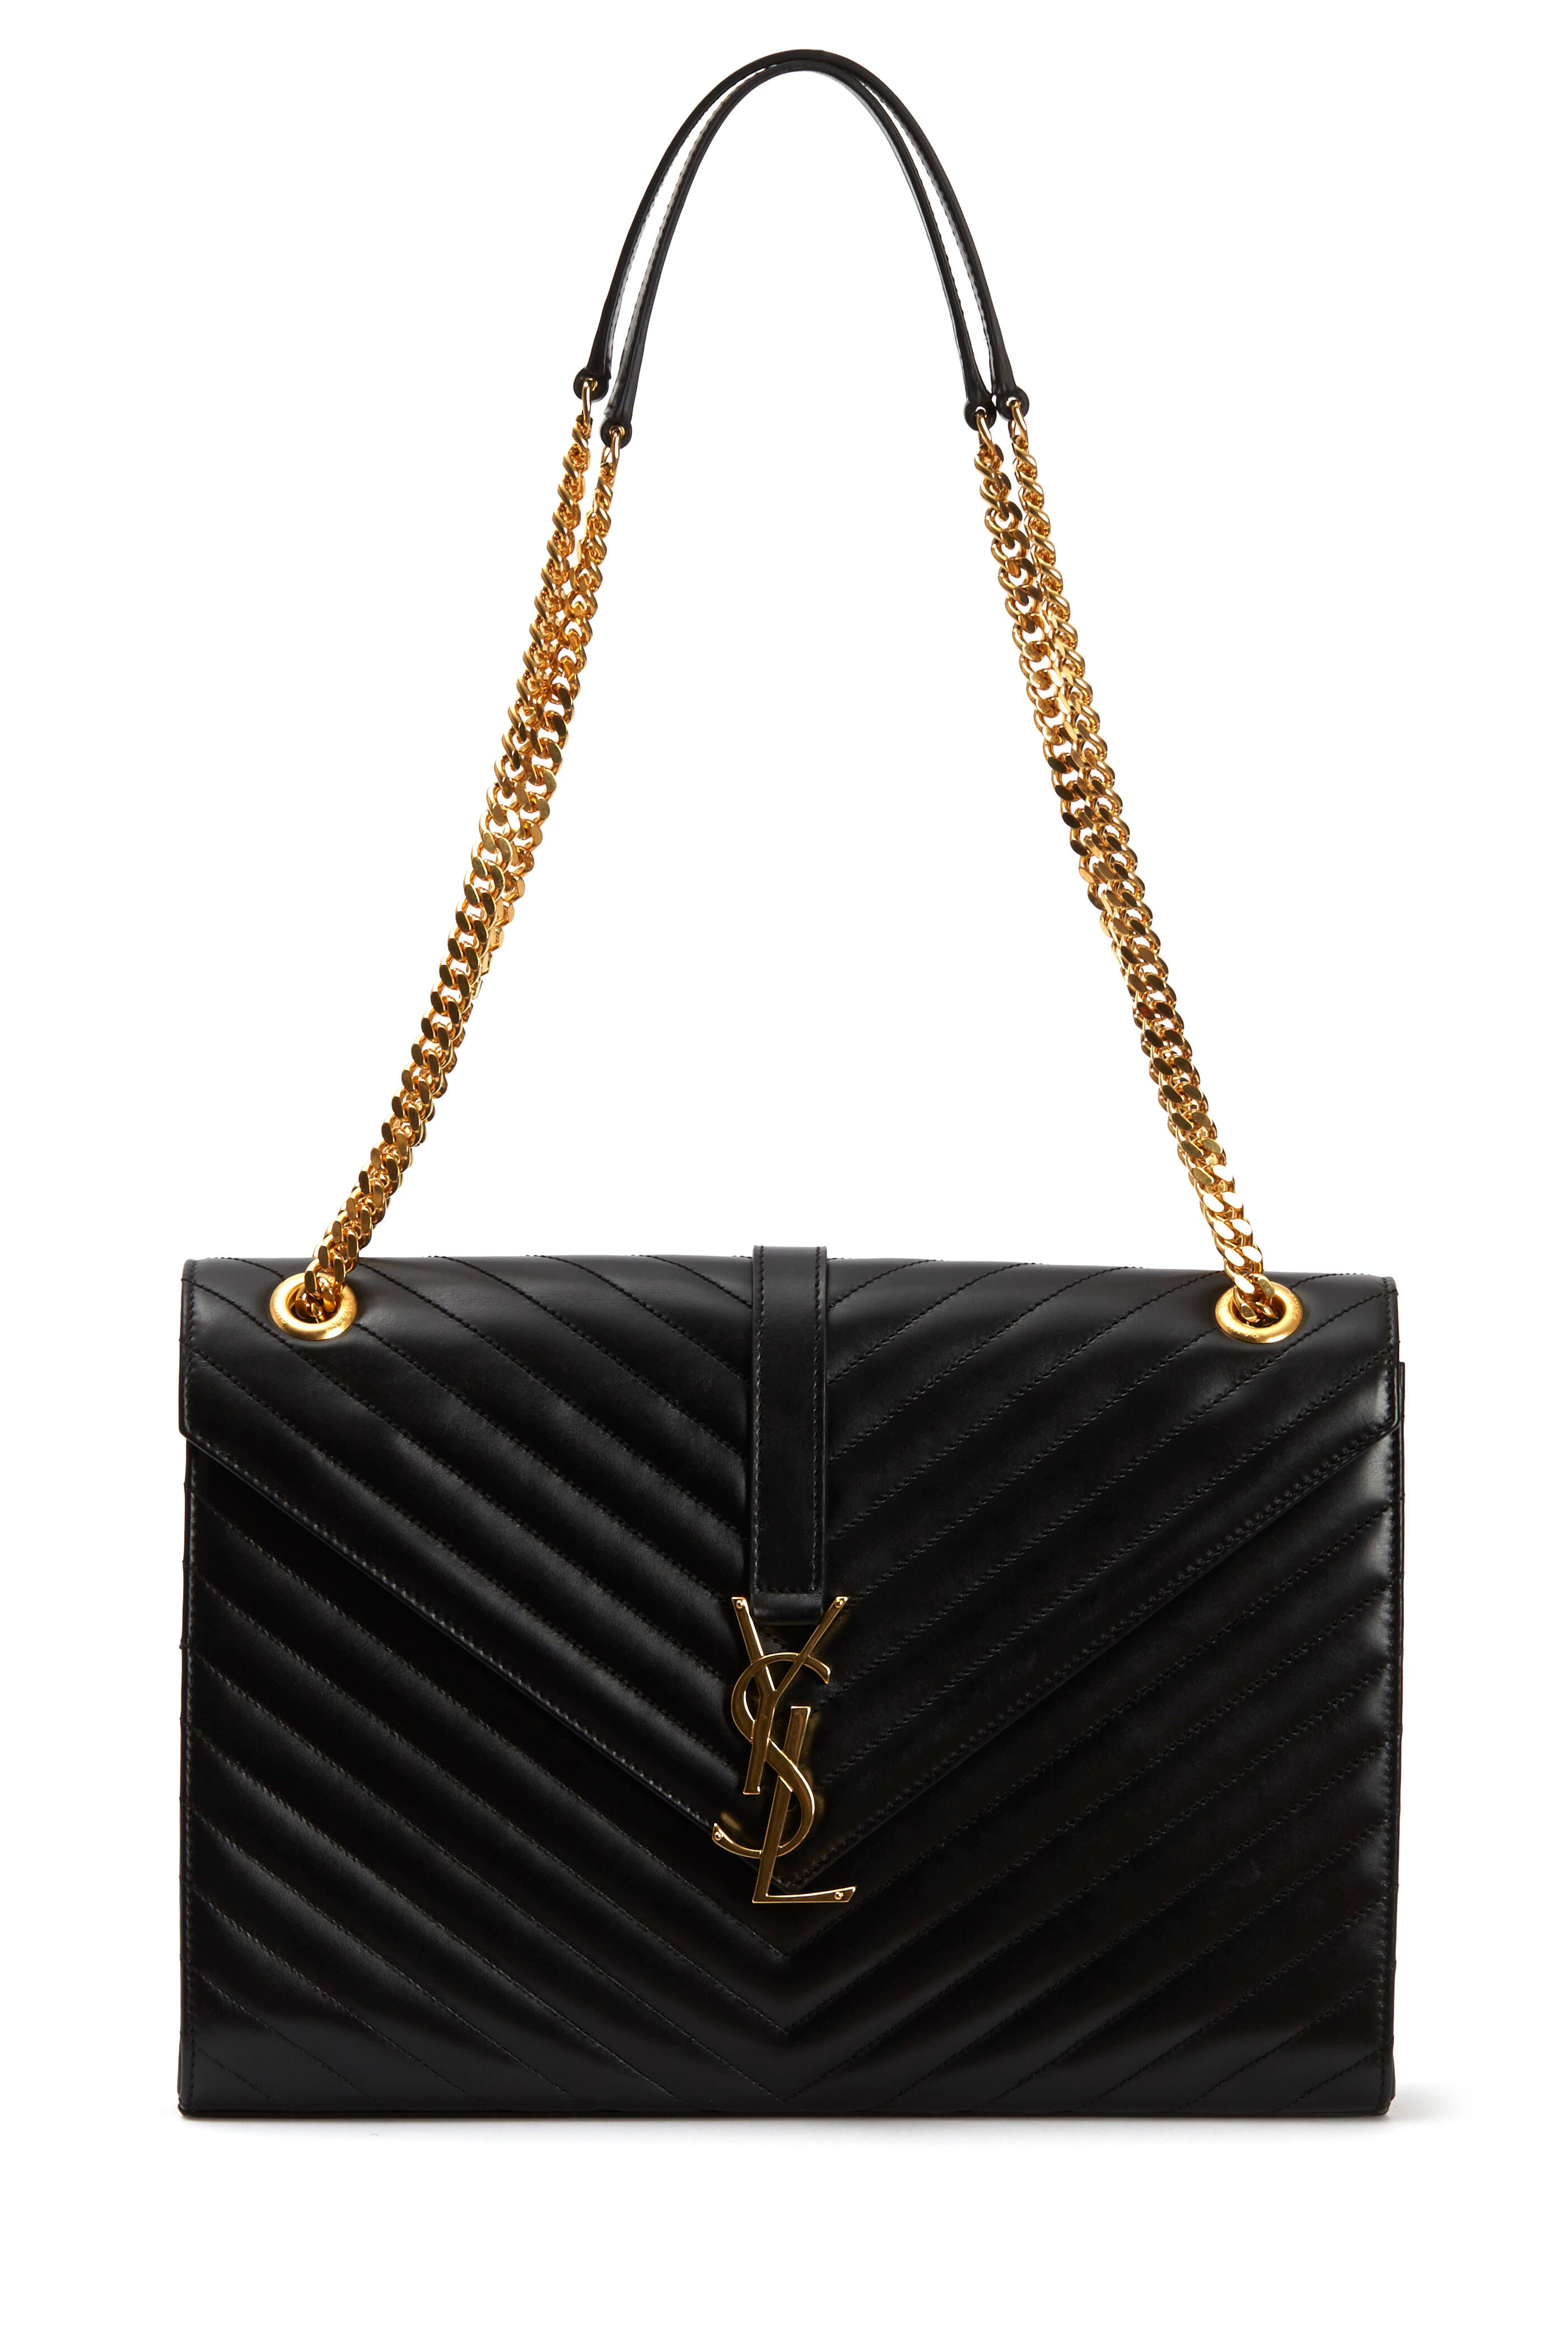 Saint Laurent Women's Le 57 Monogram Quilted Leather Small Shoulder Bag | by Mitchell Stores